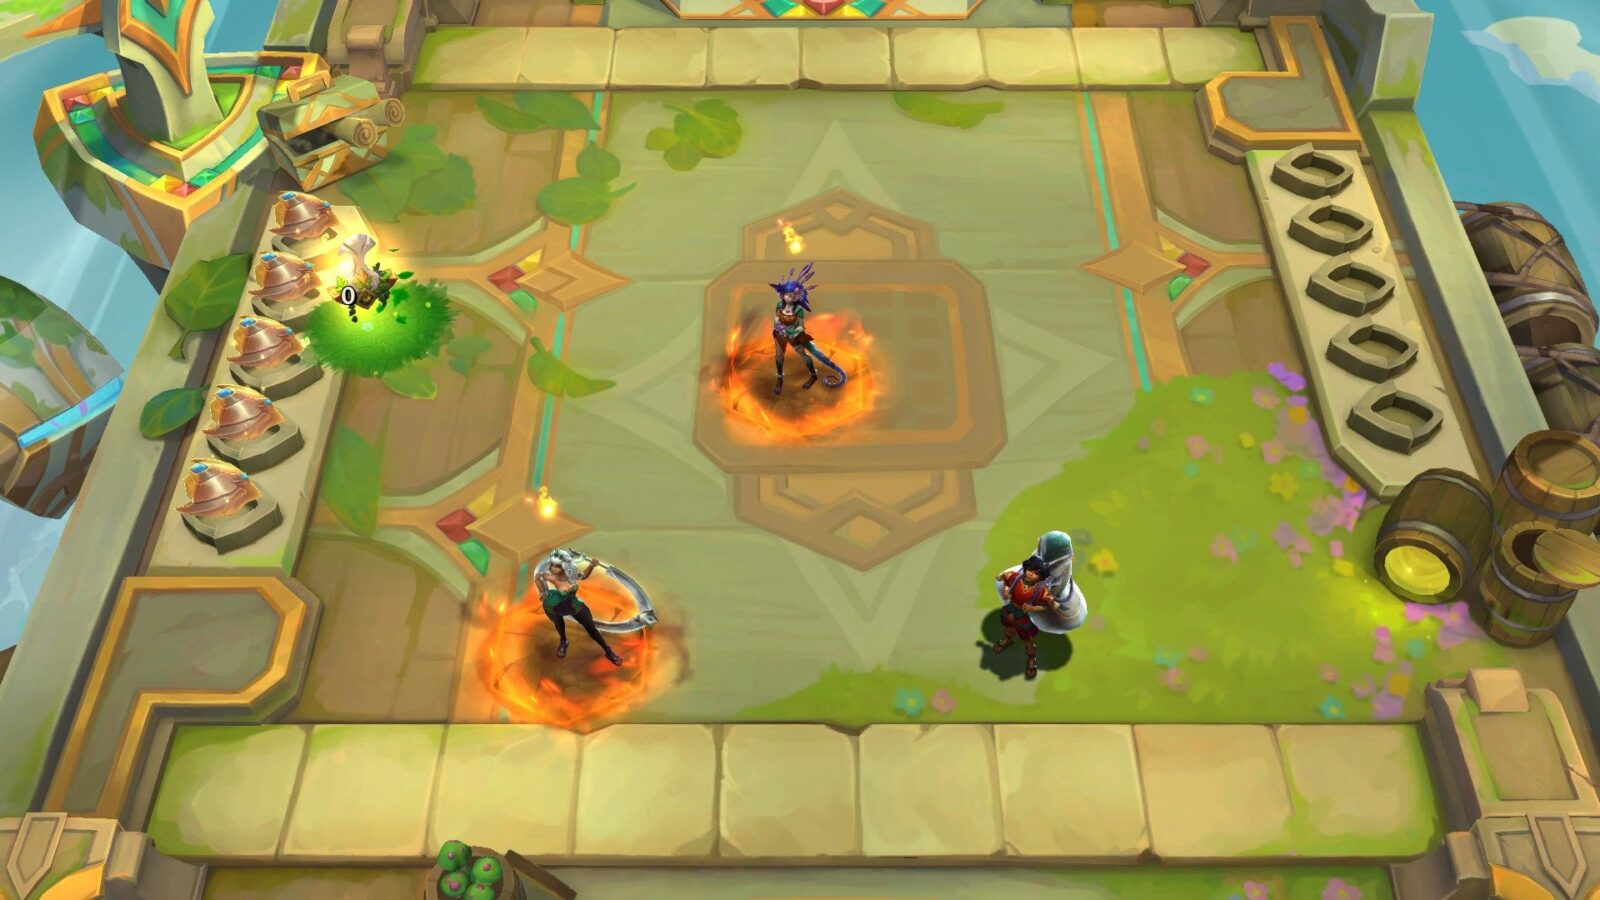 Baixe Guide for TFT - LoLCHESS.GG no PC